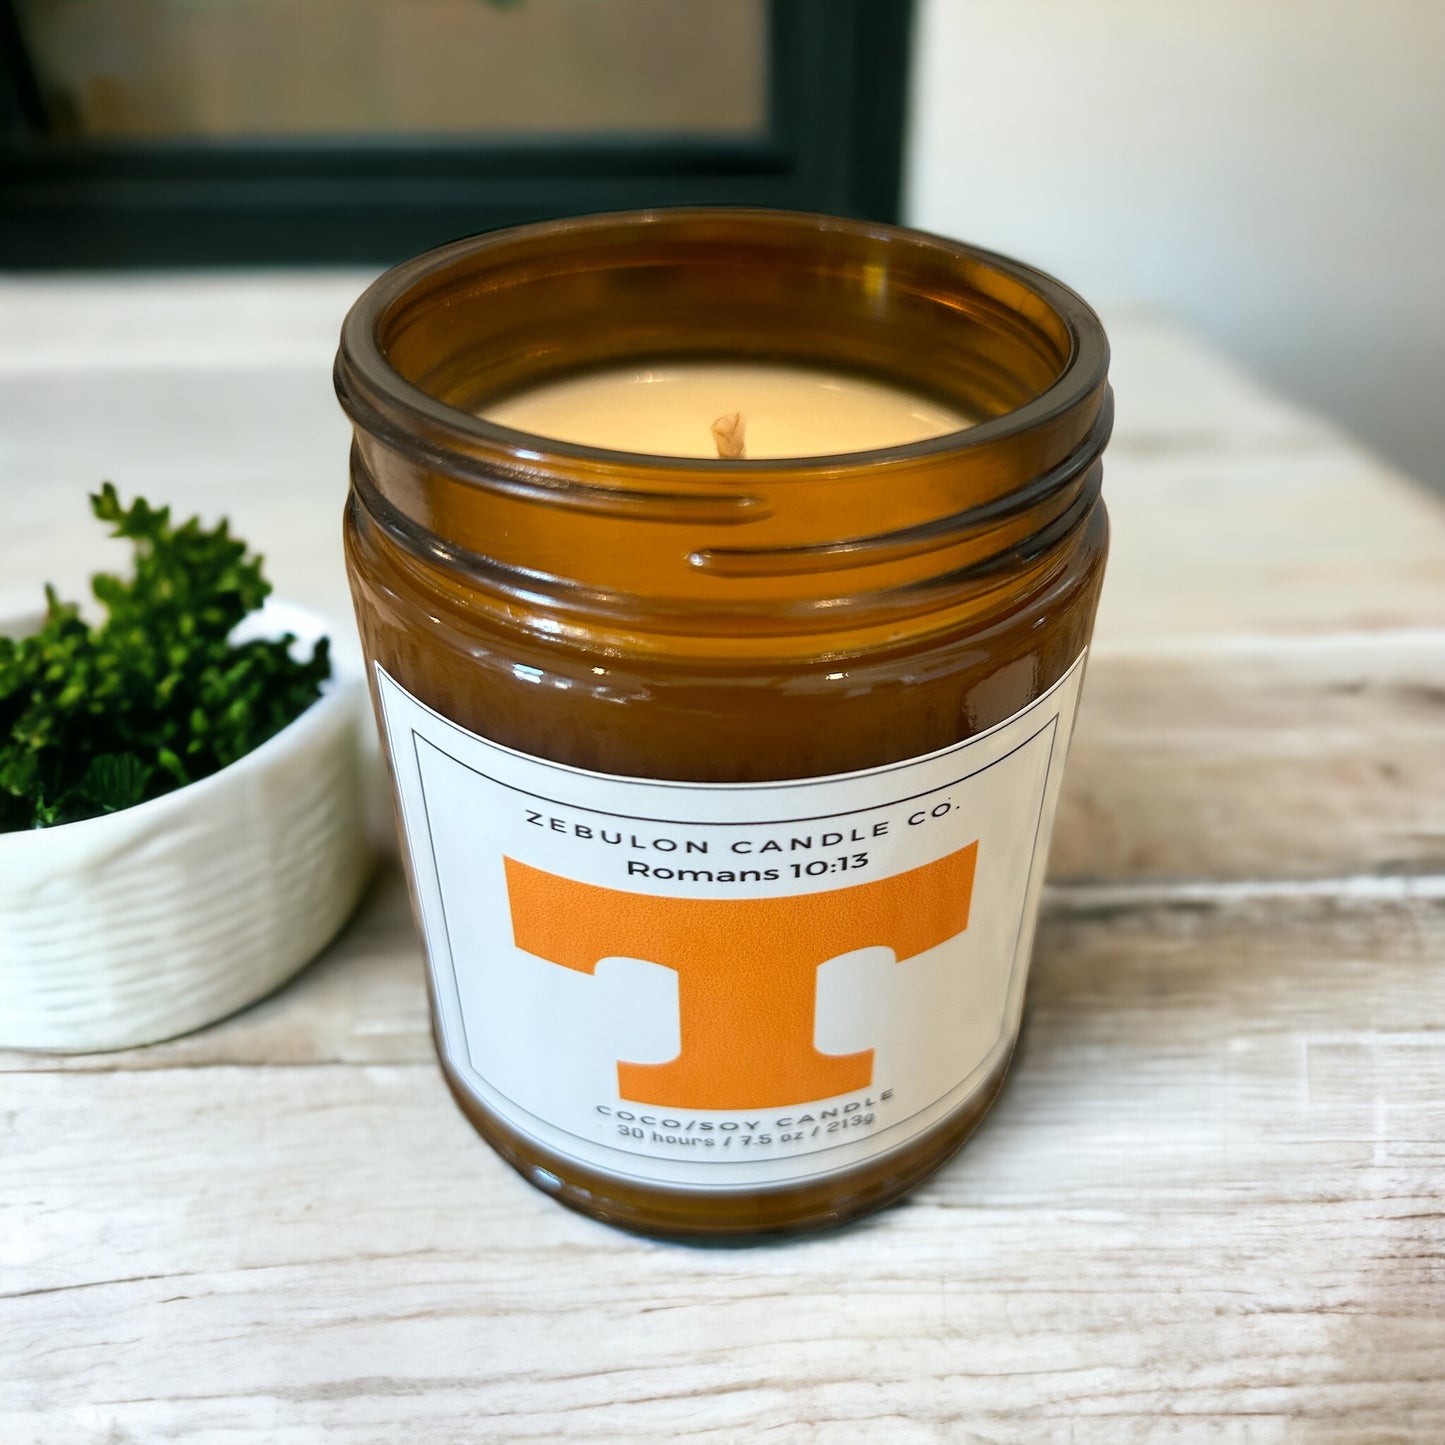 Tennessee Candle